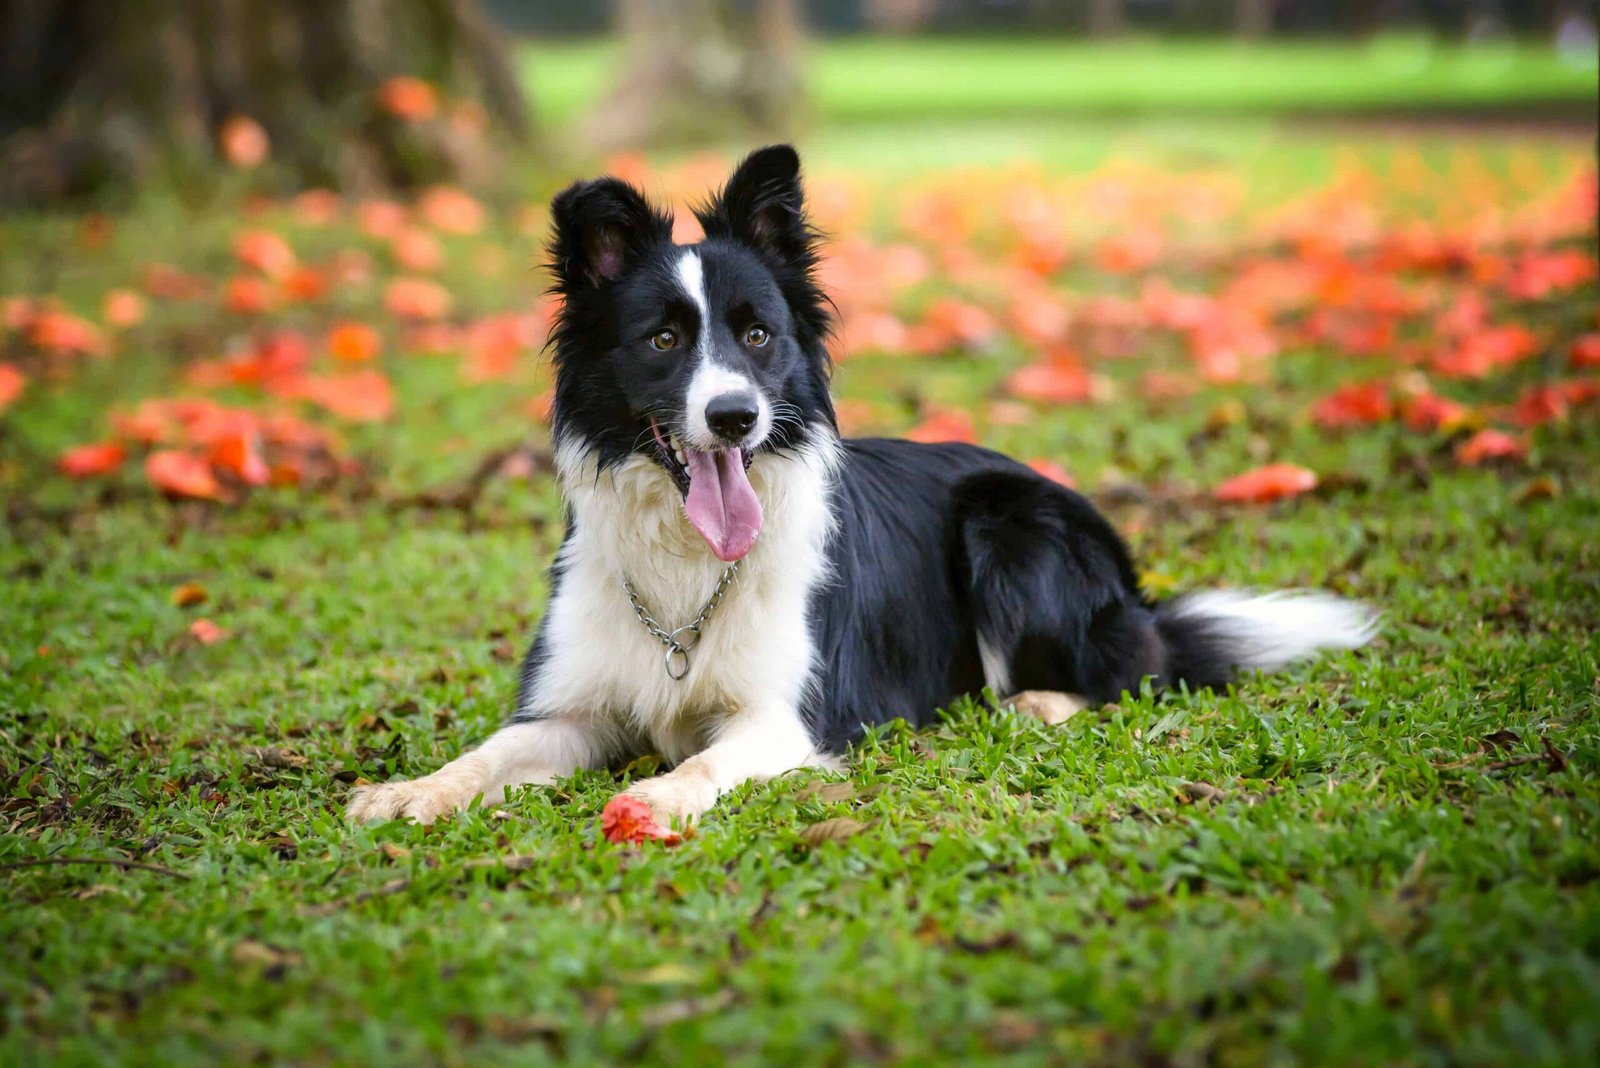 The Border Collie: A Highly Intelligent and Athletic Breed